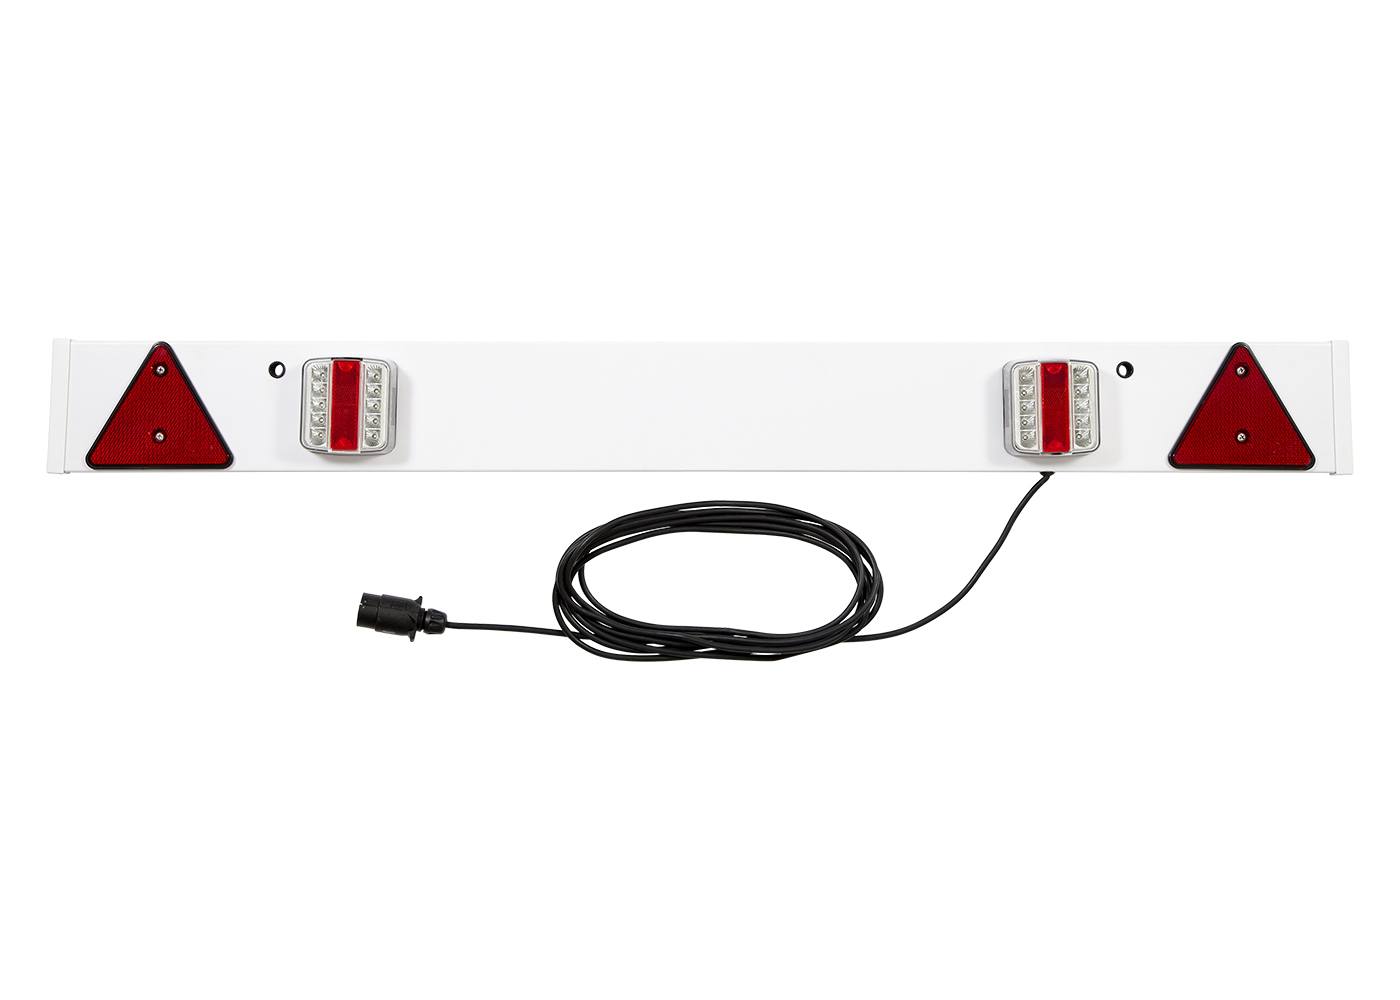 leisure MART Trailer Light Board 4ft 6 Inch Wide with 6m Cable Part no LMX504 